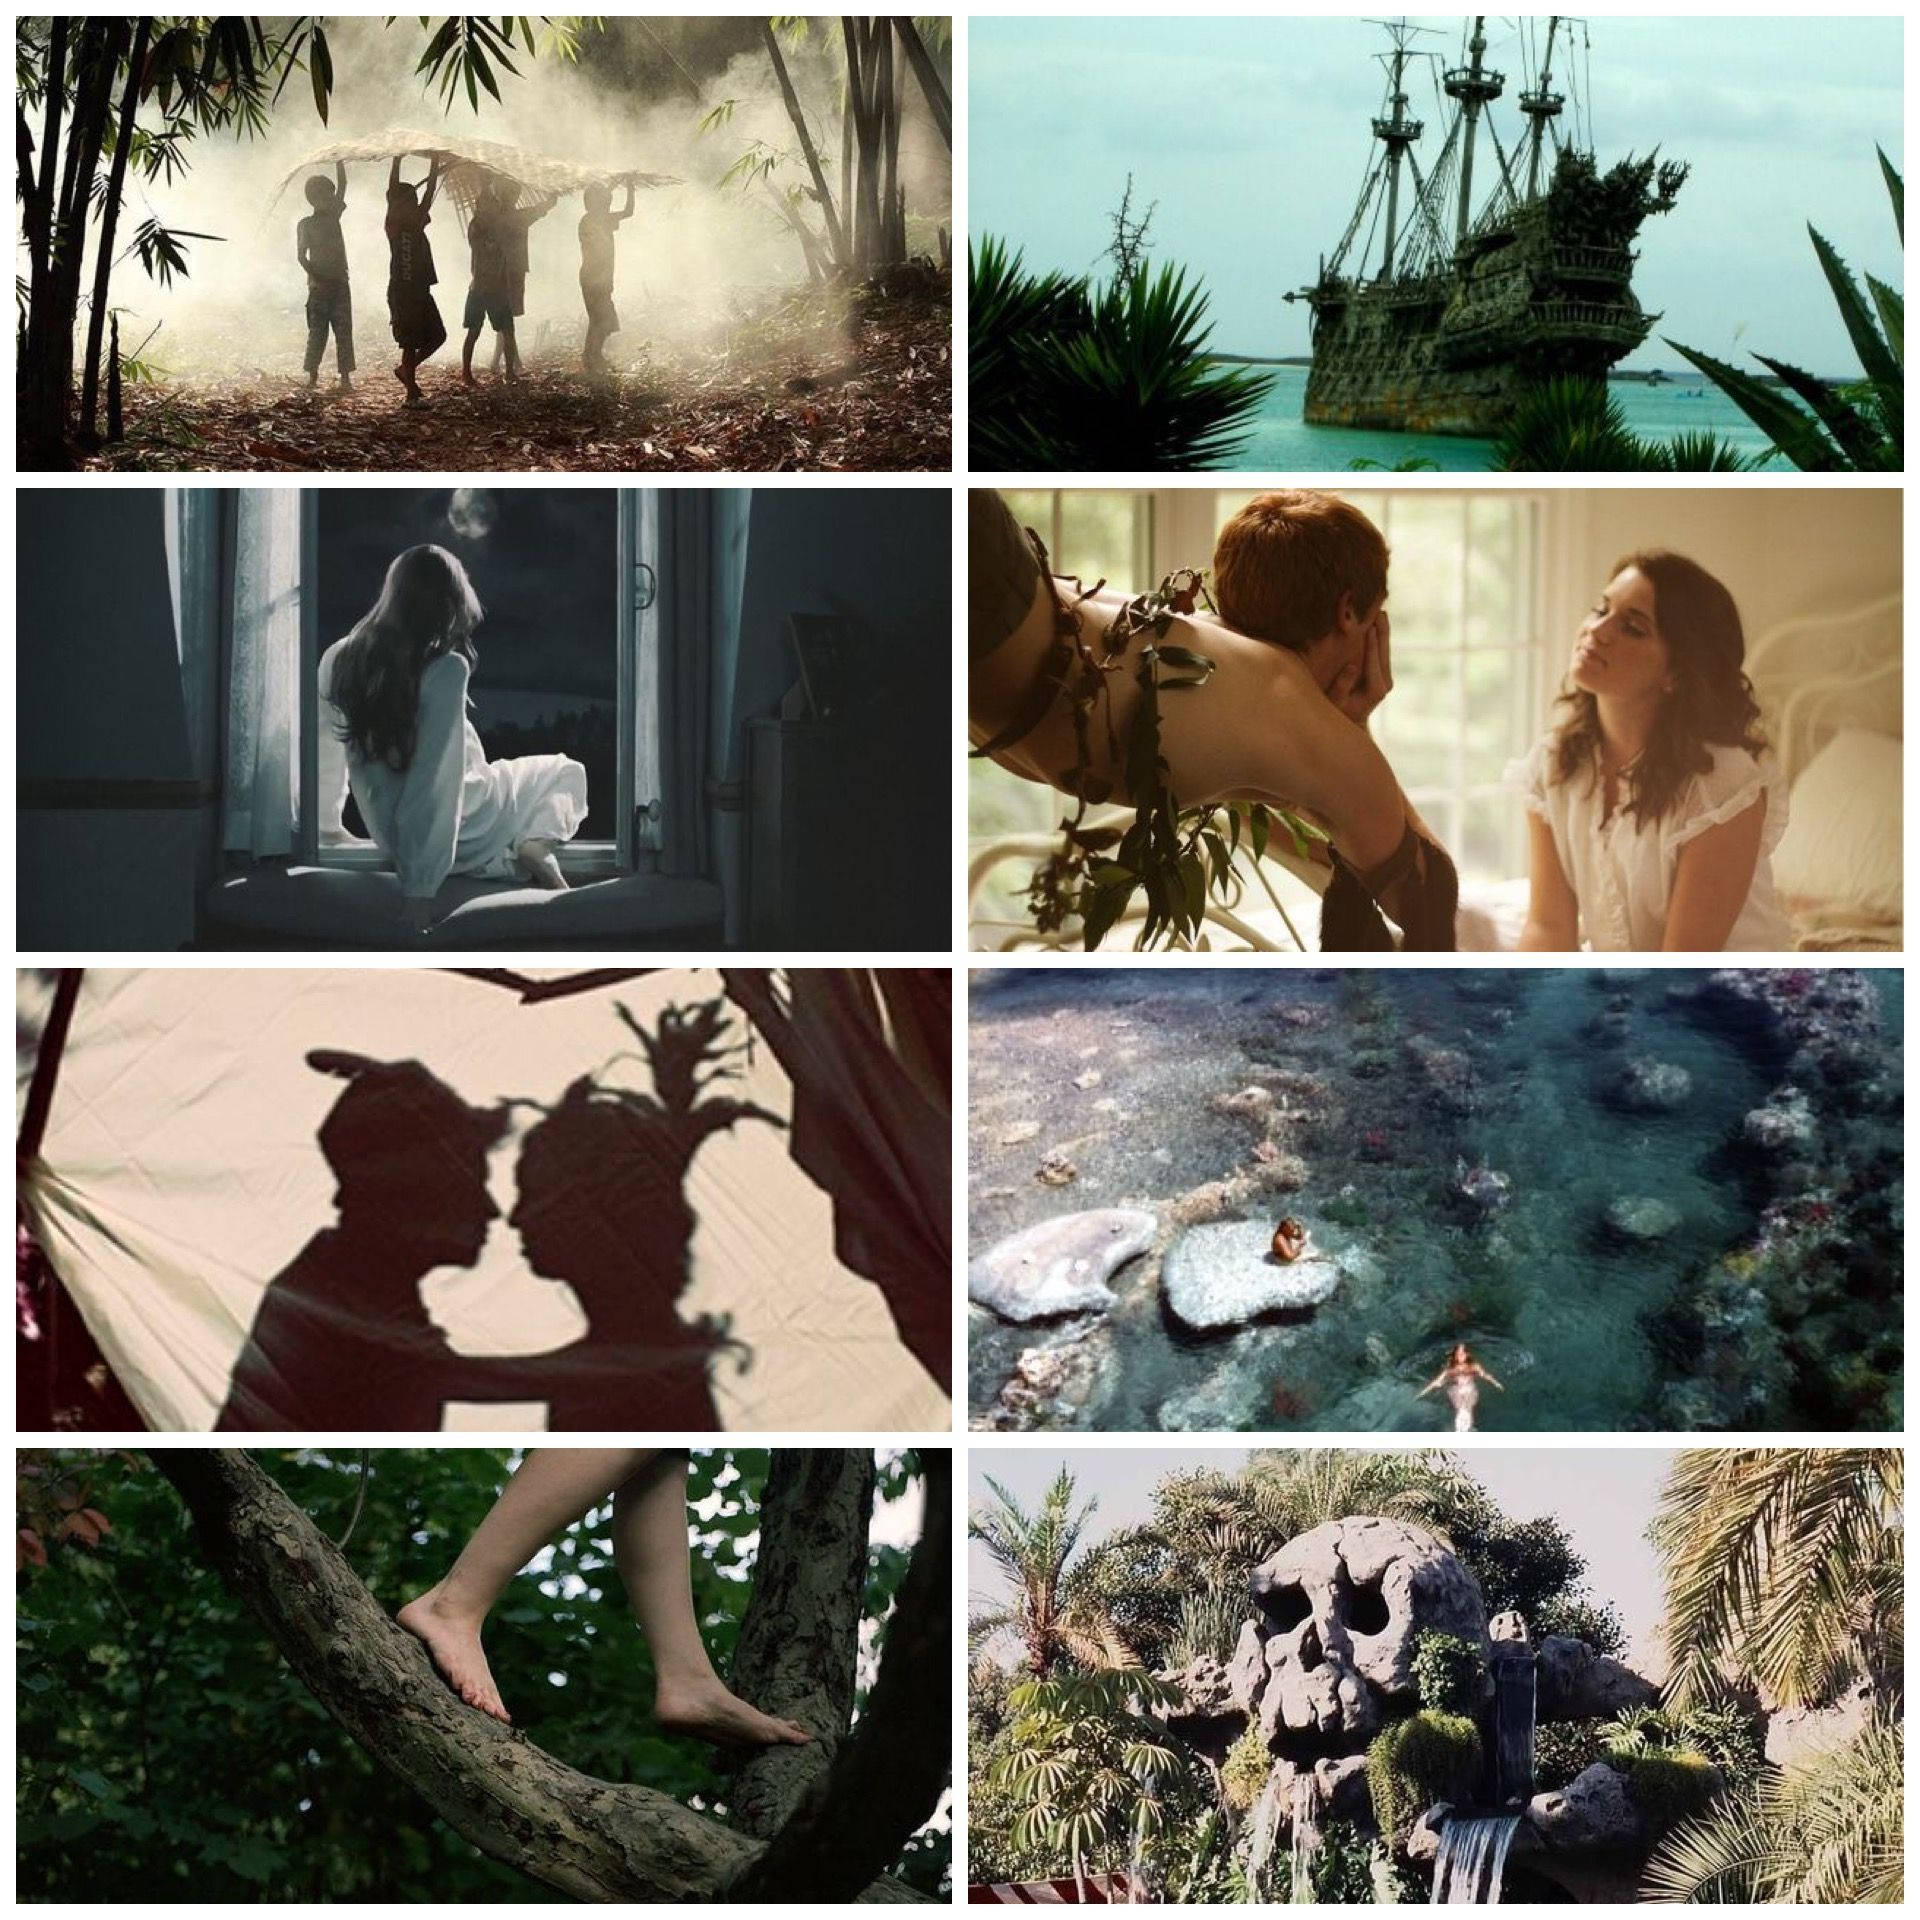 A collage of pictures with different scenes - Peter Pan